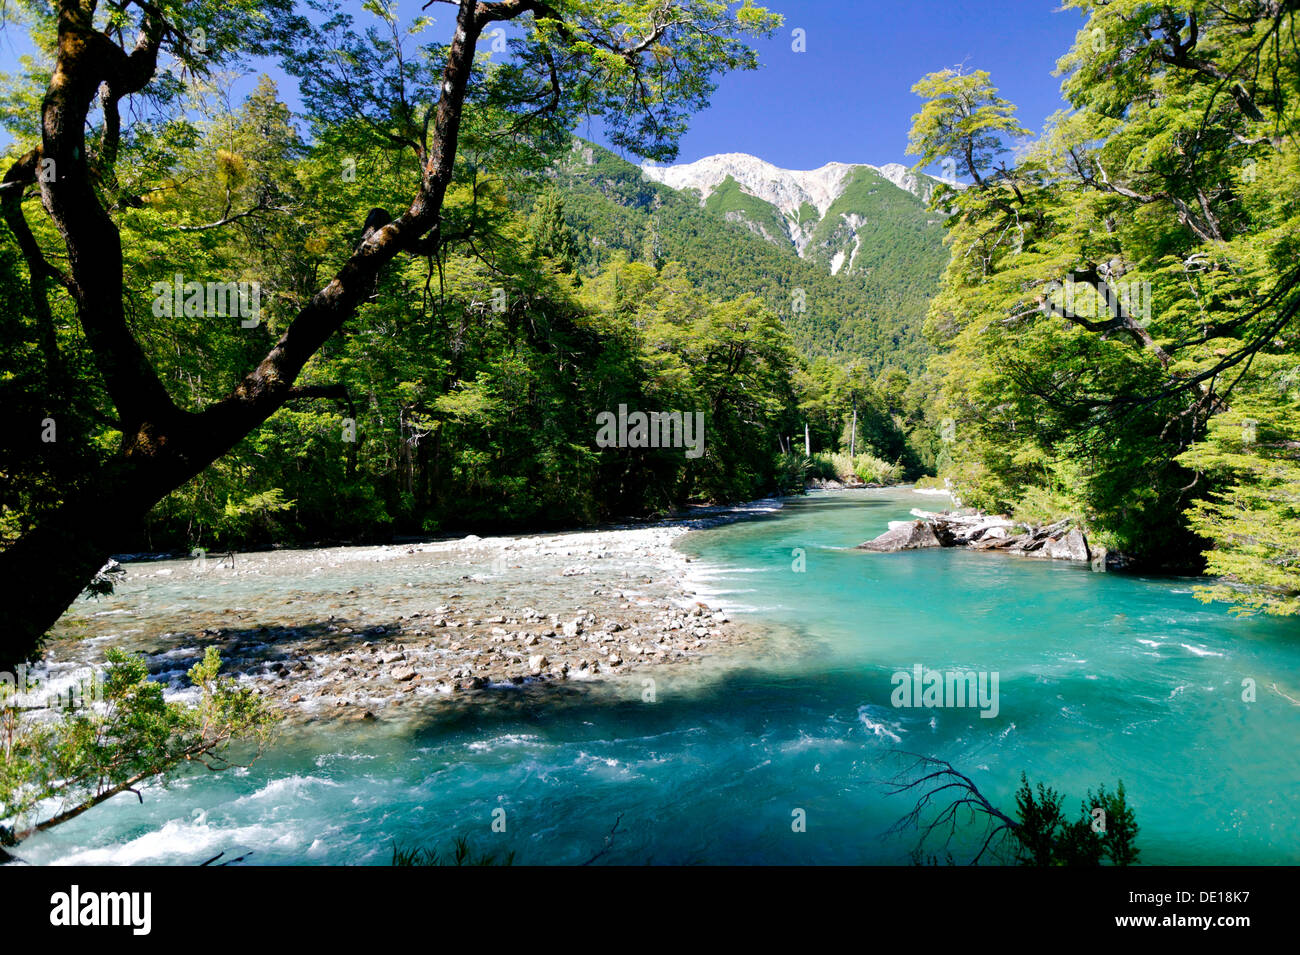 Esquel river, Los Alerces National Park, Chubut Province, Patagonia, Argentina, South America Stock Photo